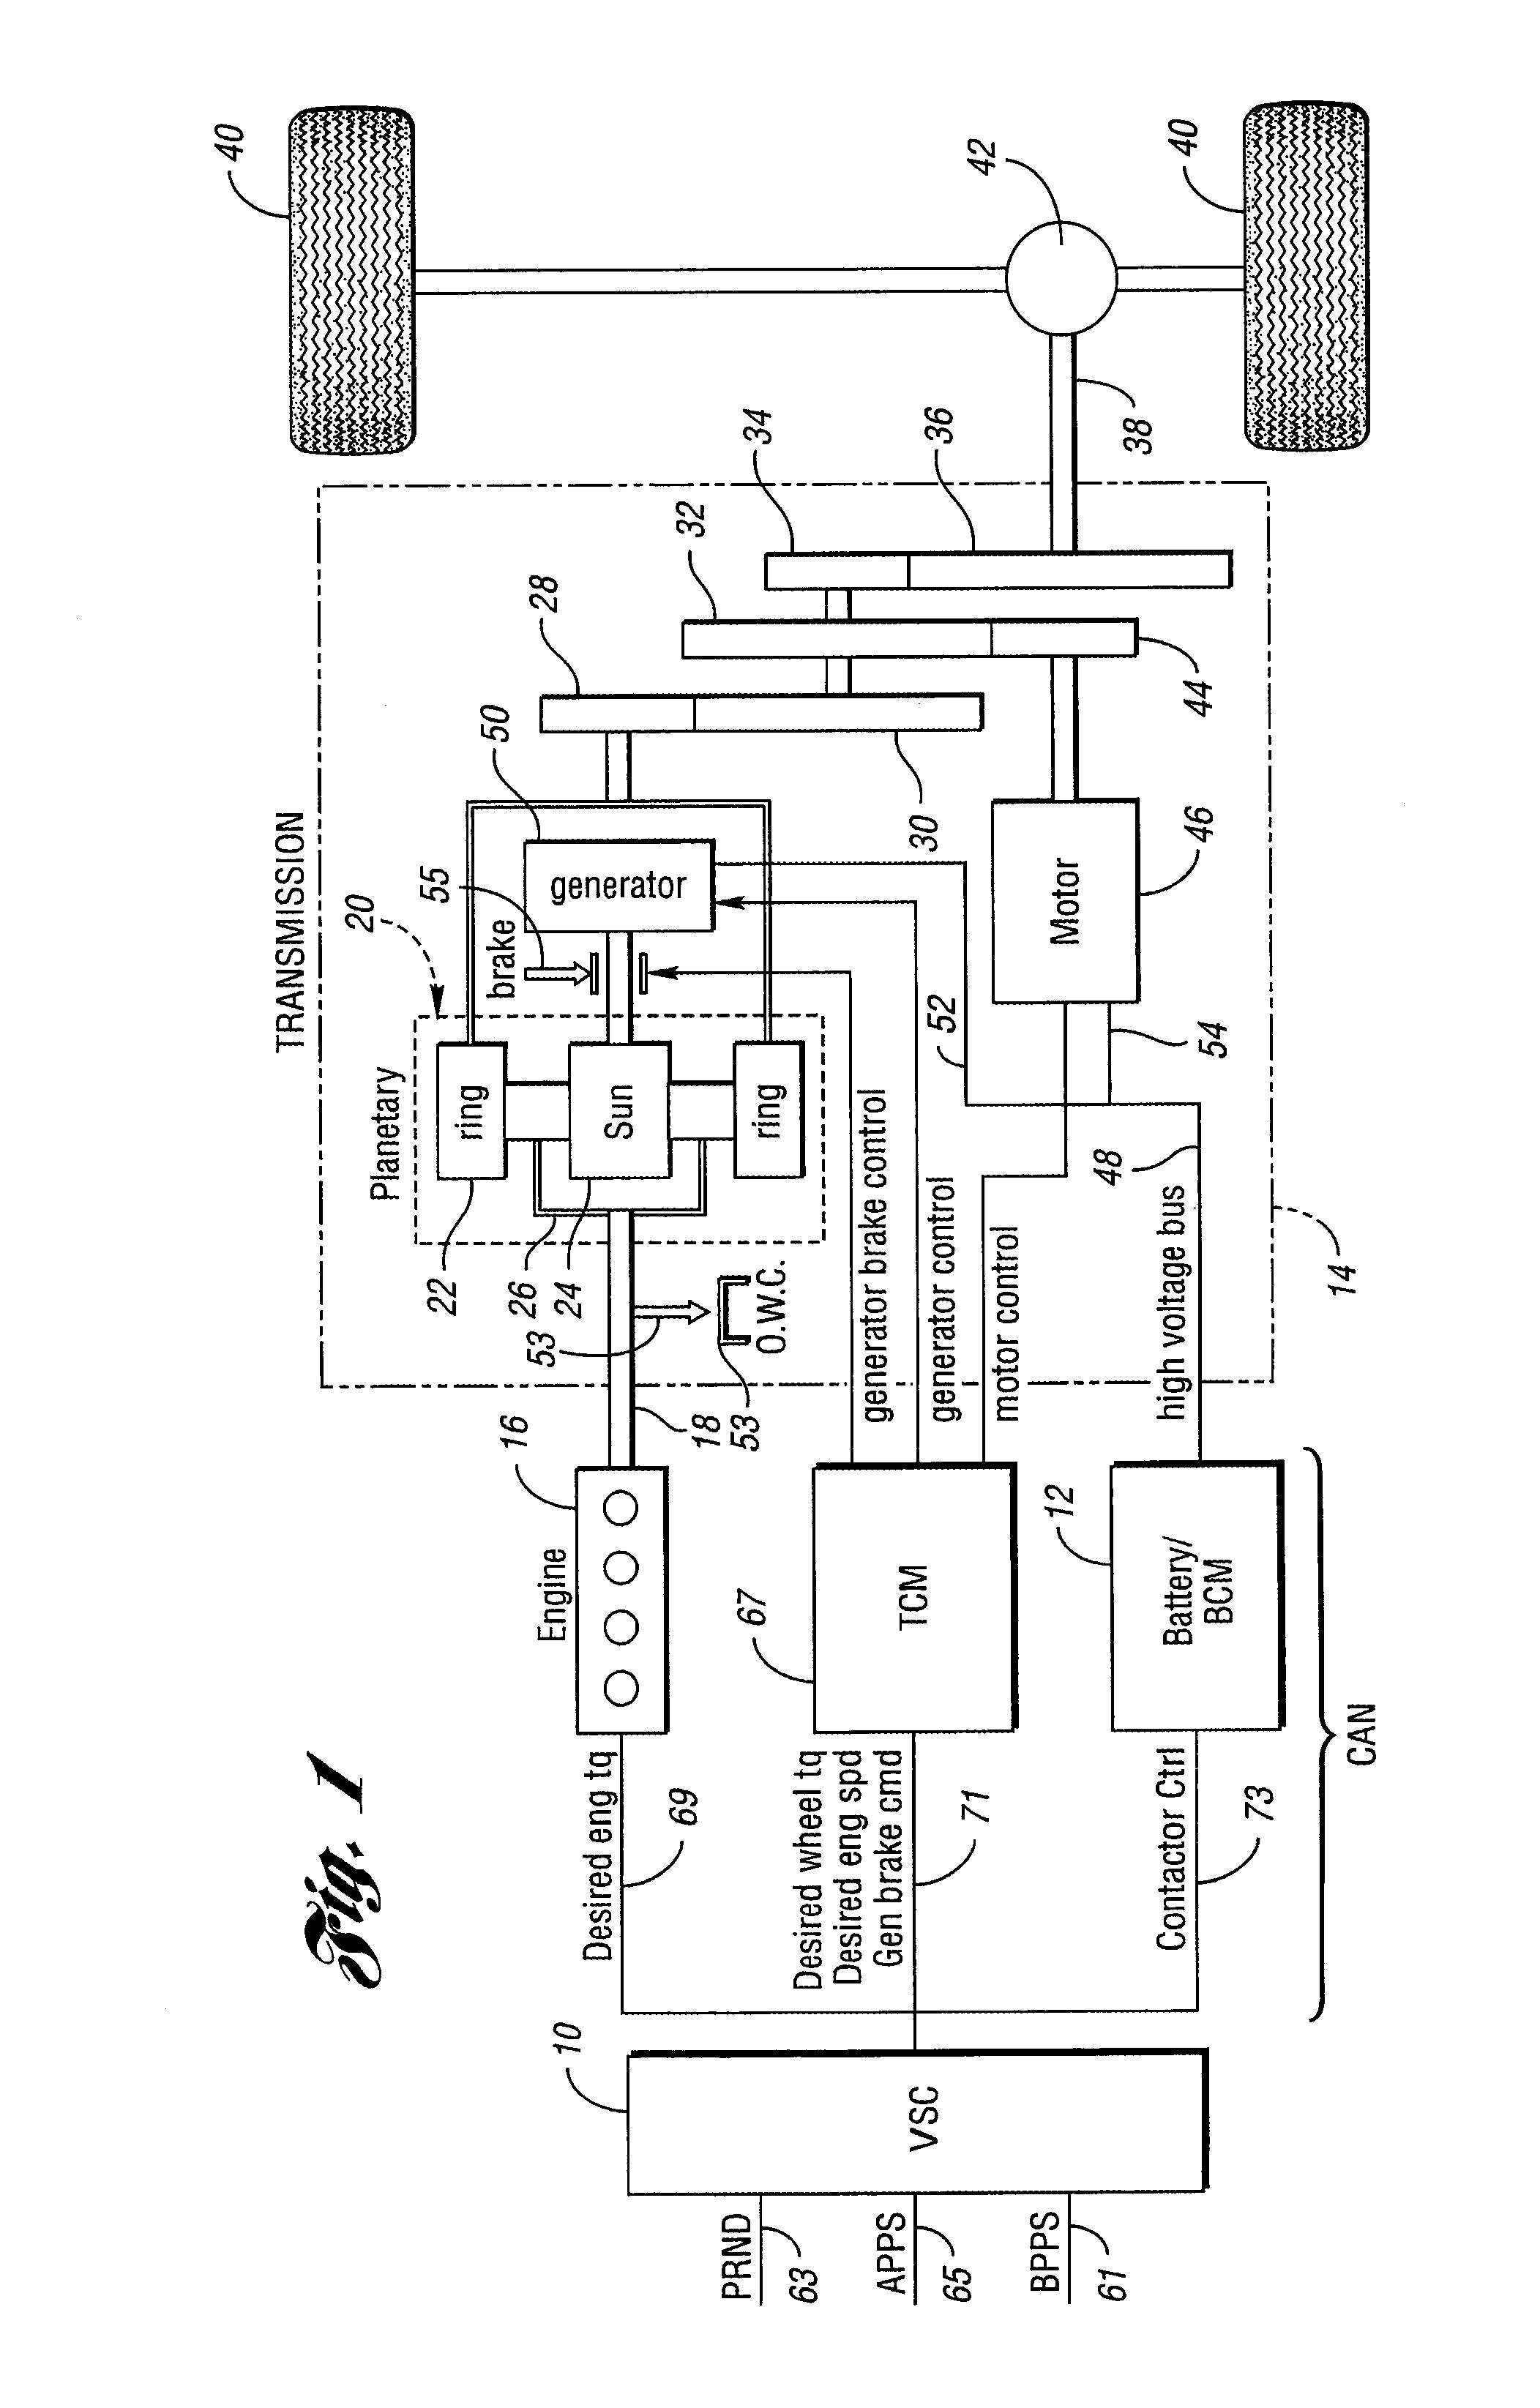 Engine Power Demand Load-Leveling for a Hybrid Electric Vehicle